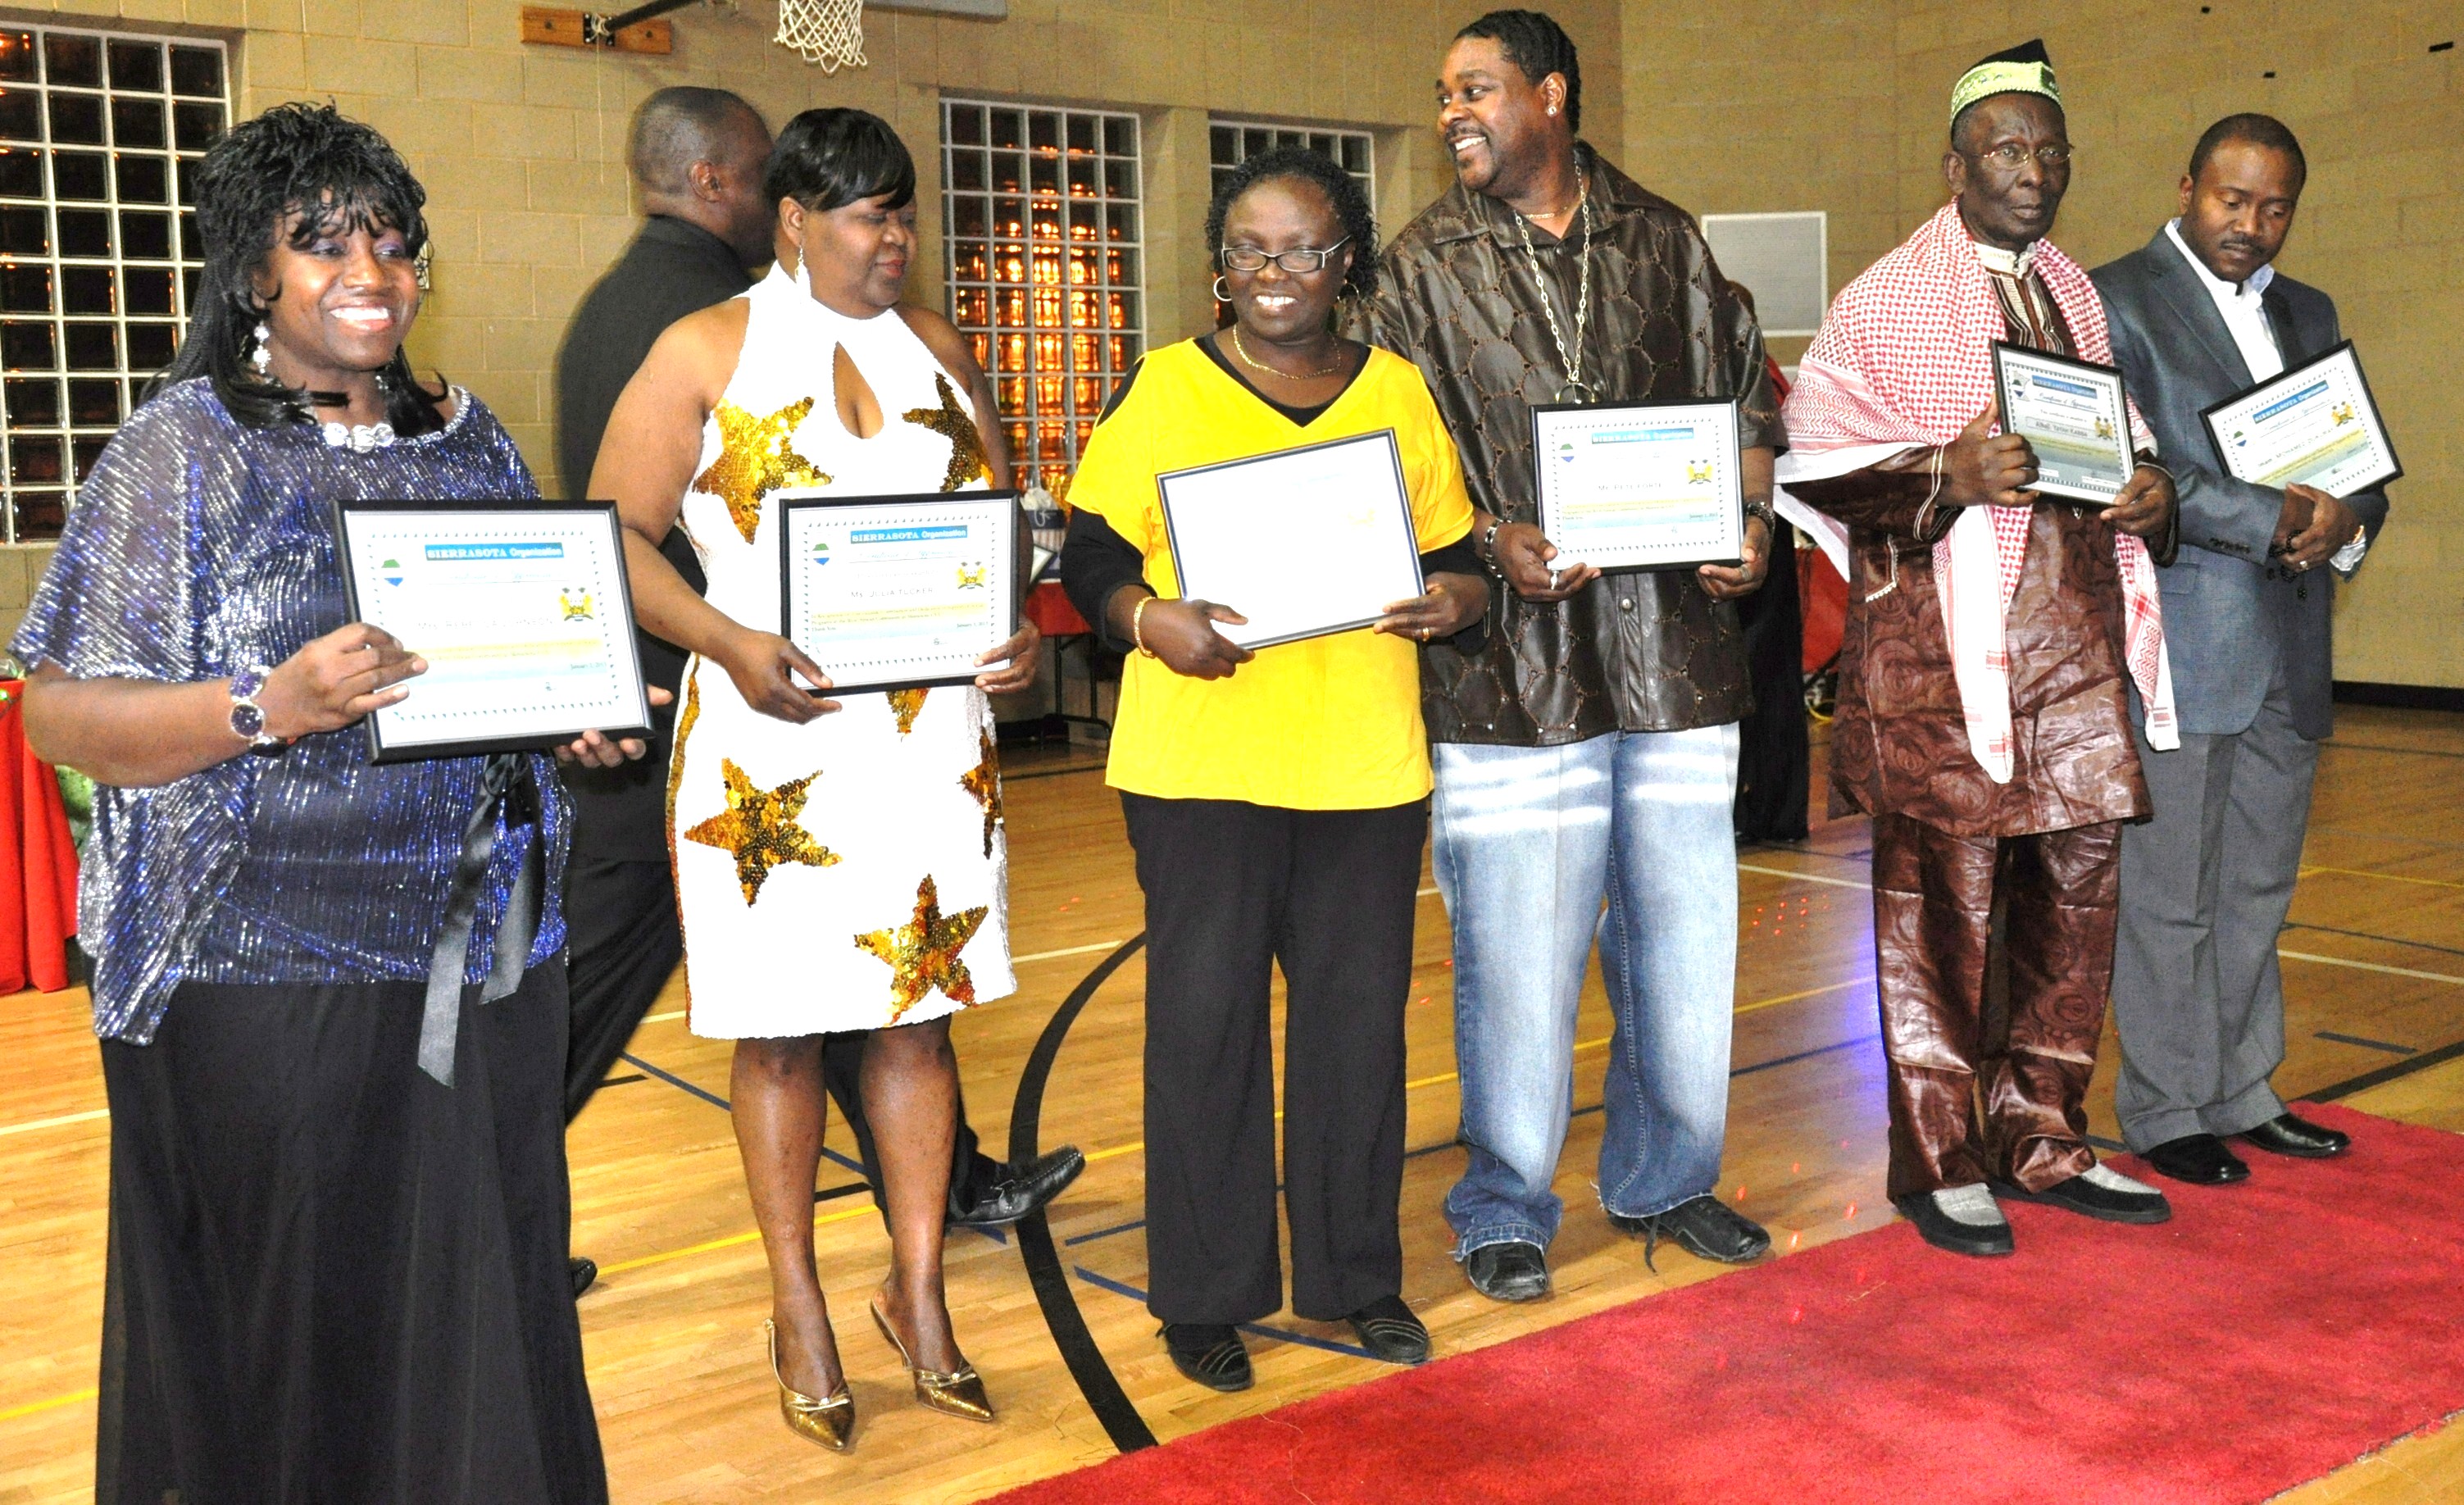 Group of six adults smiling and holding certificates in a gymnasium, dressed in formal and traditional attire.